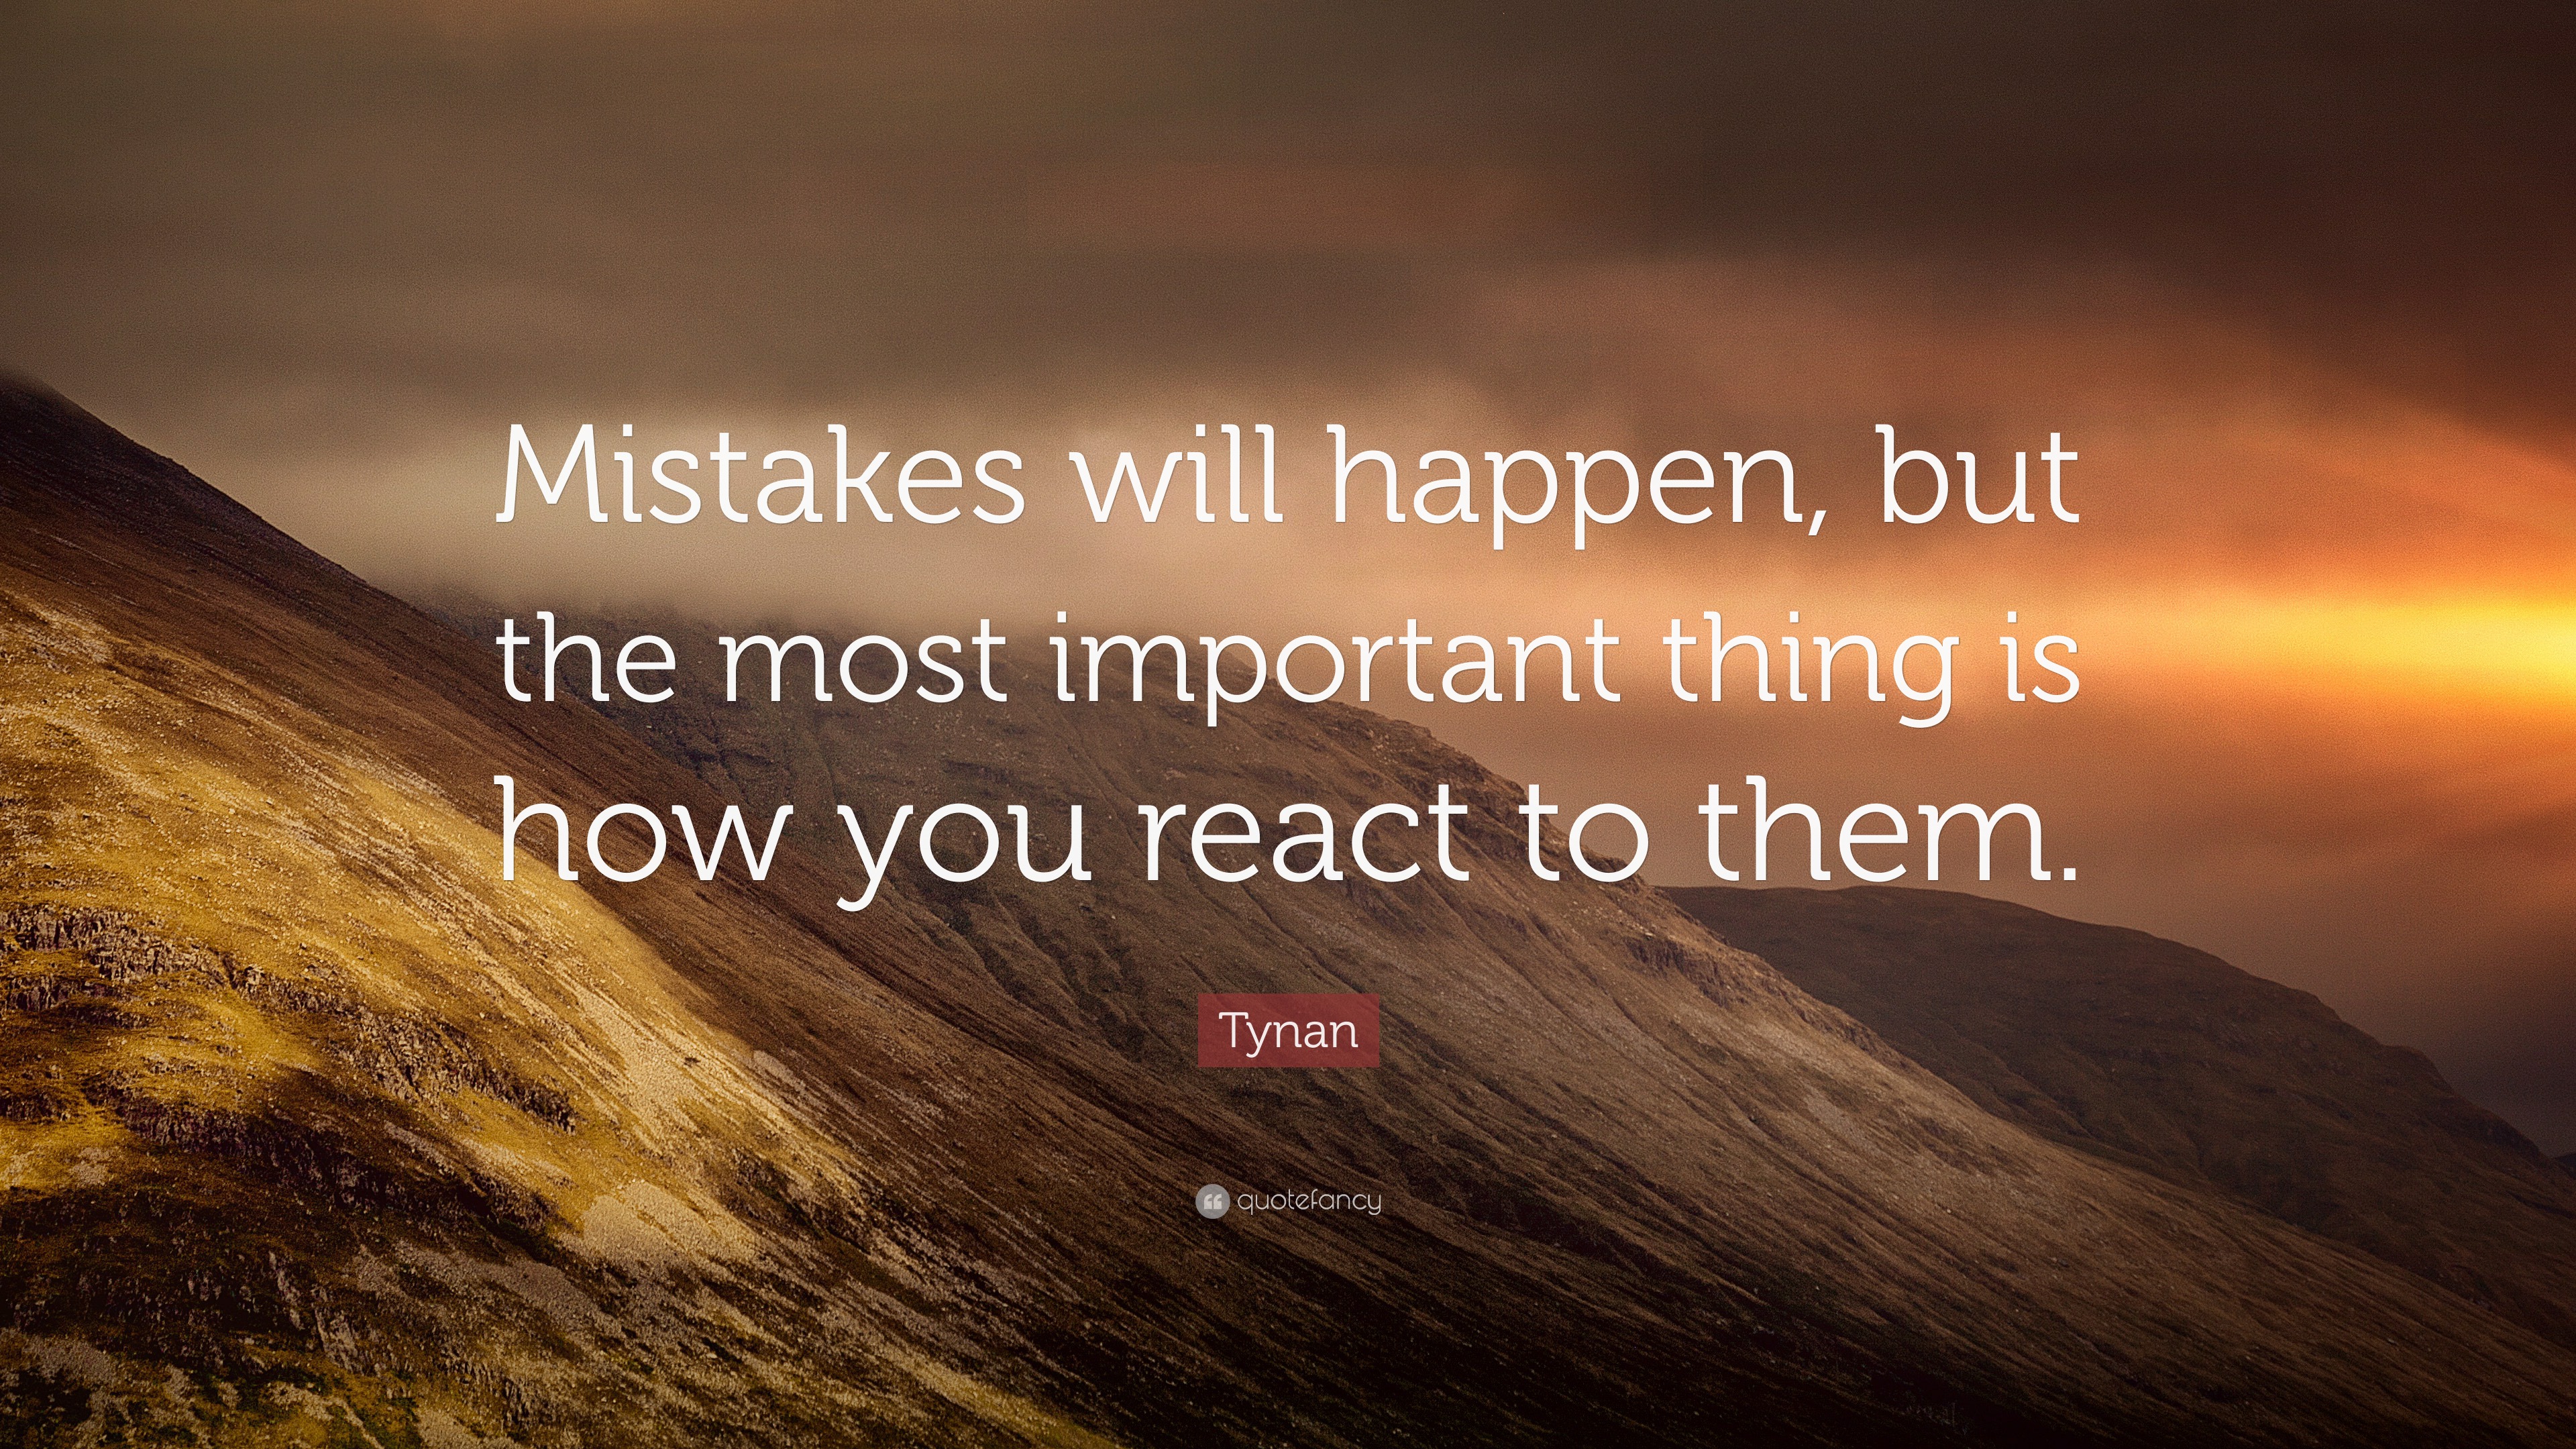 Mistakes happen - but the right way of dealing with them is